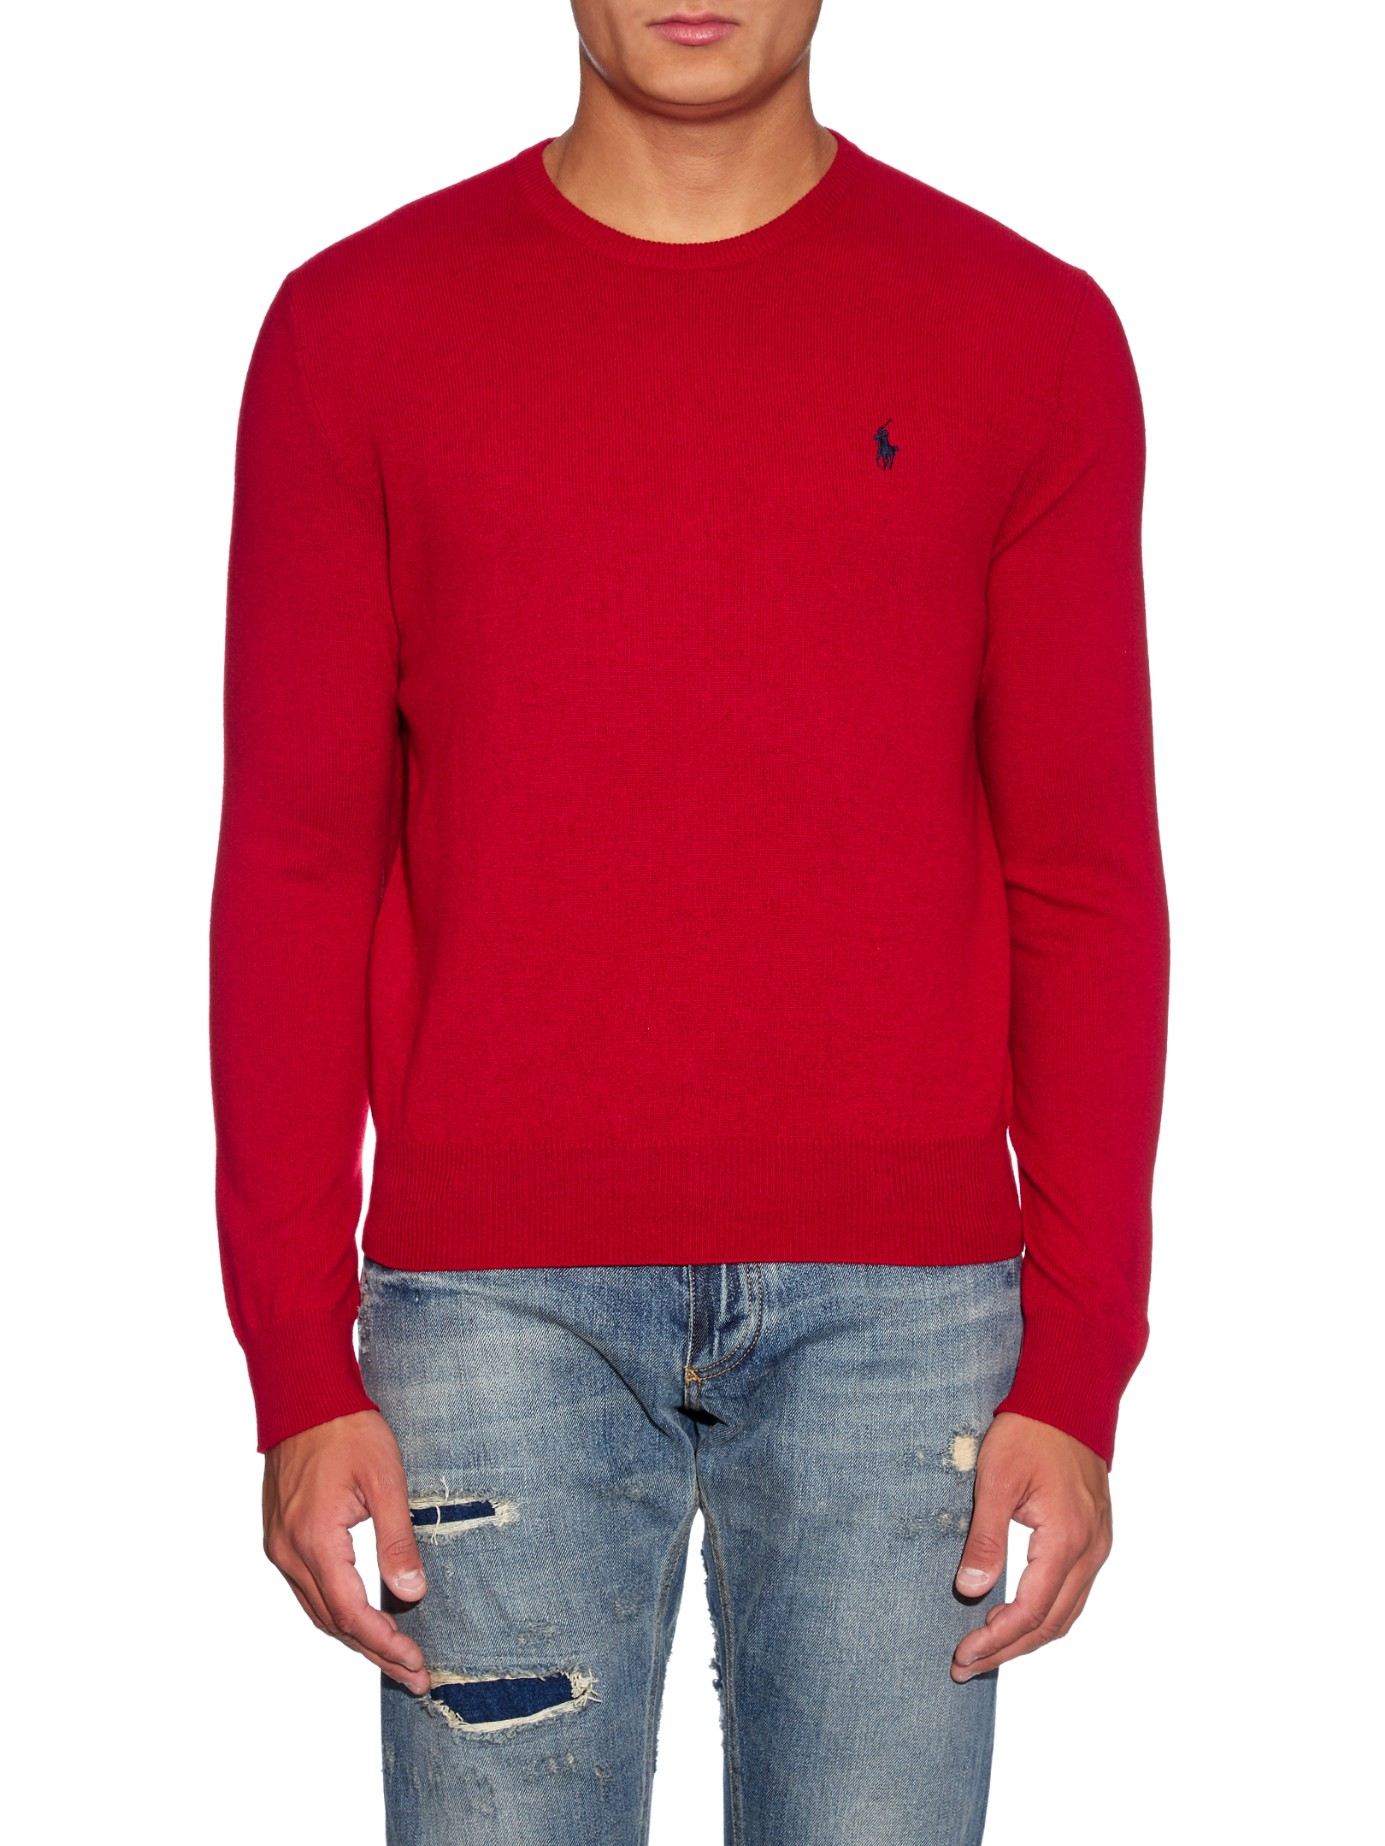 Lyst - Polo ralph lauren Crew-neck Long-sleeved Wool Sweater in Red for Men